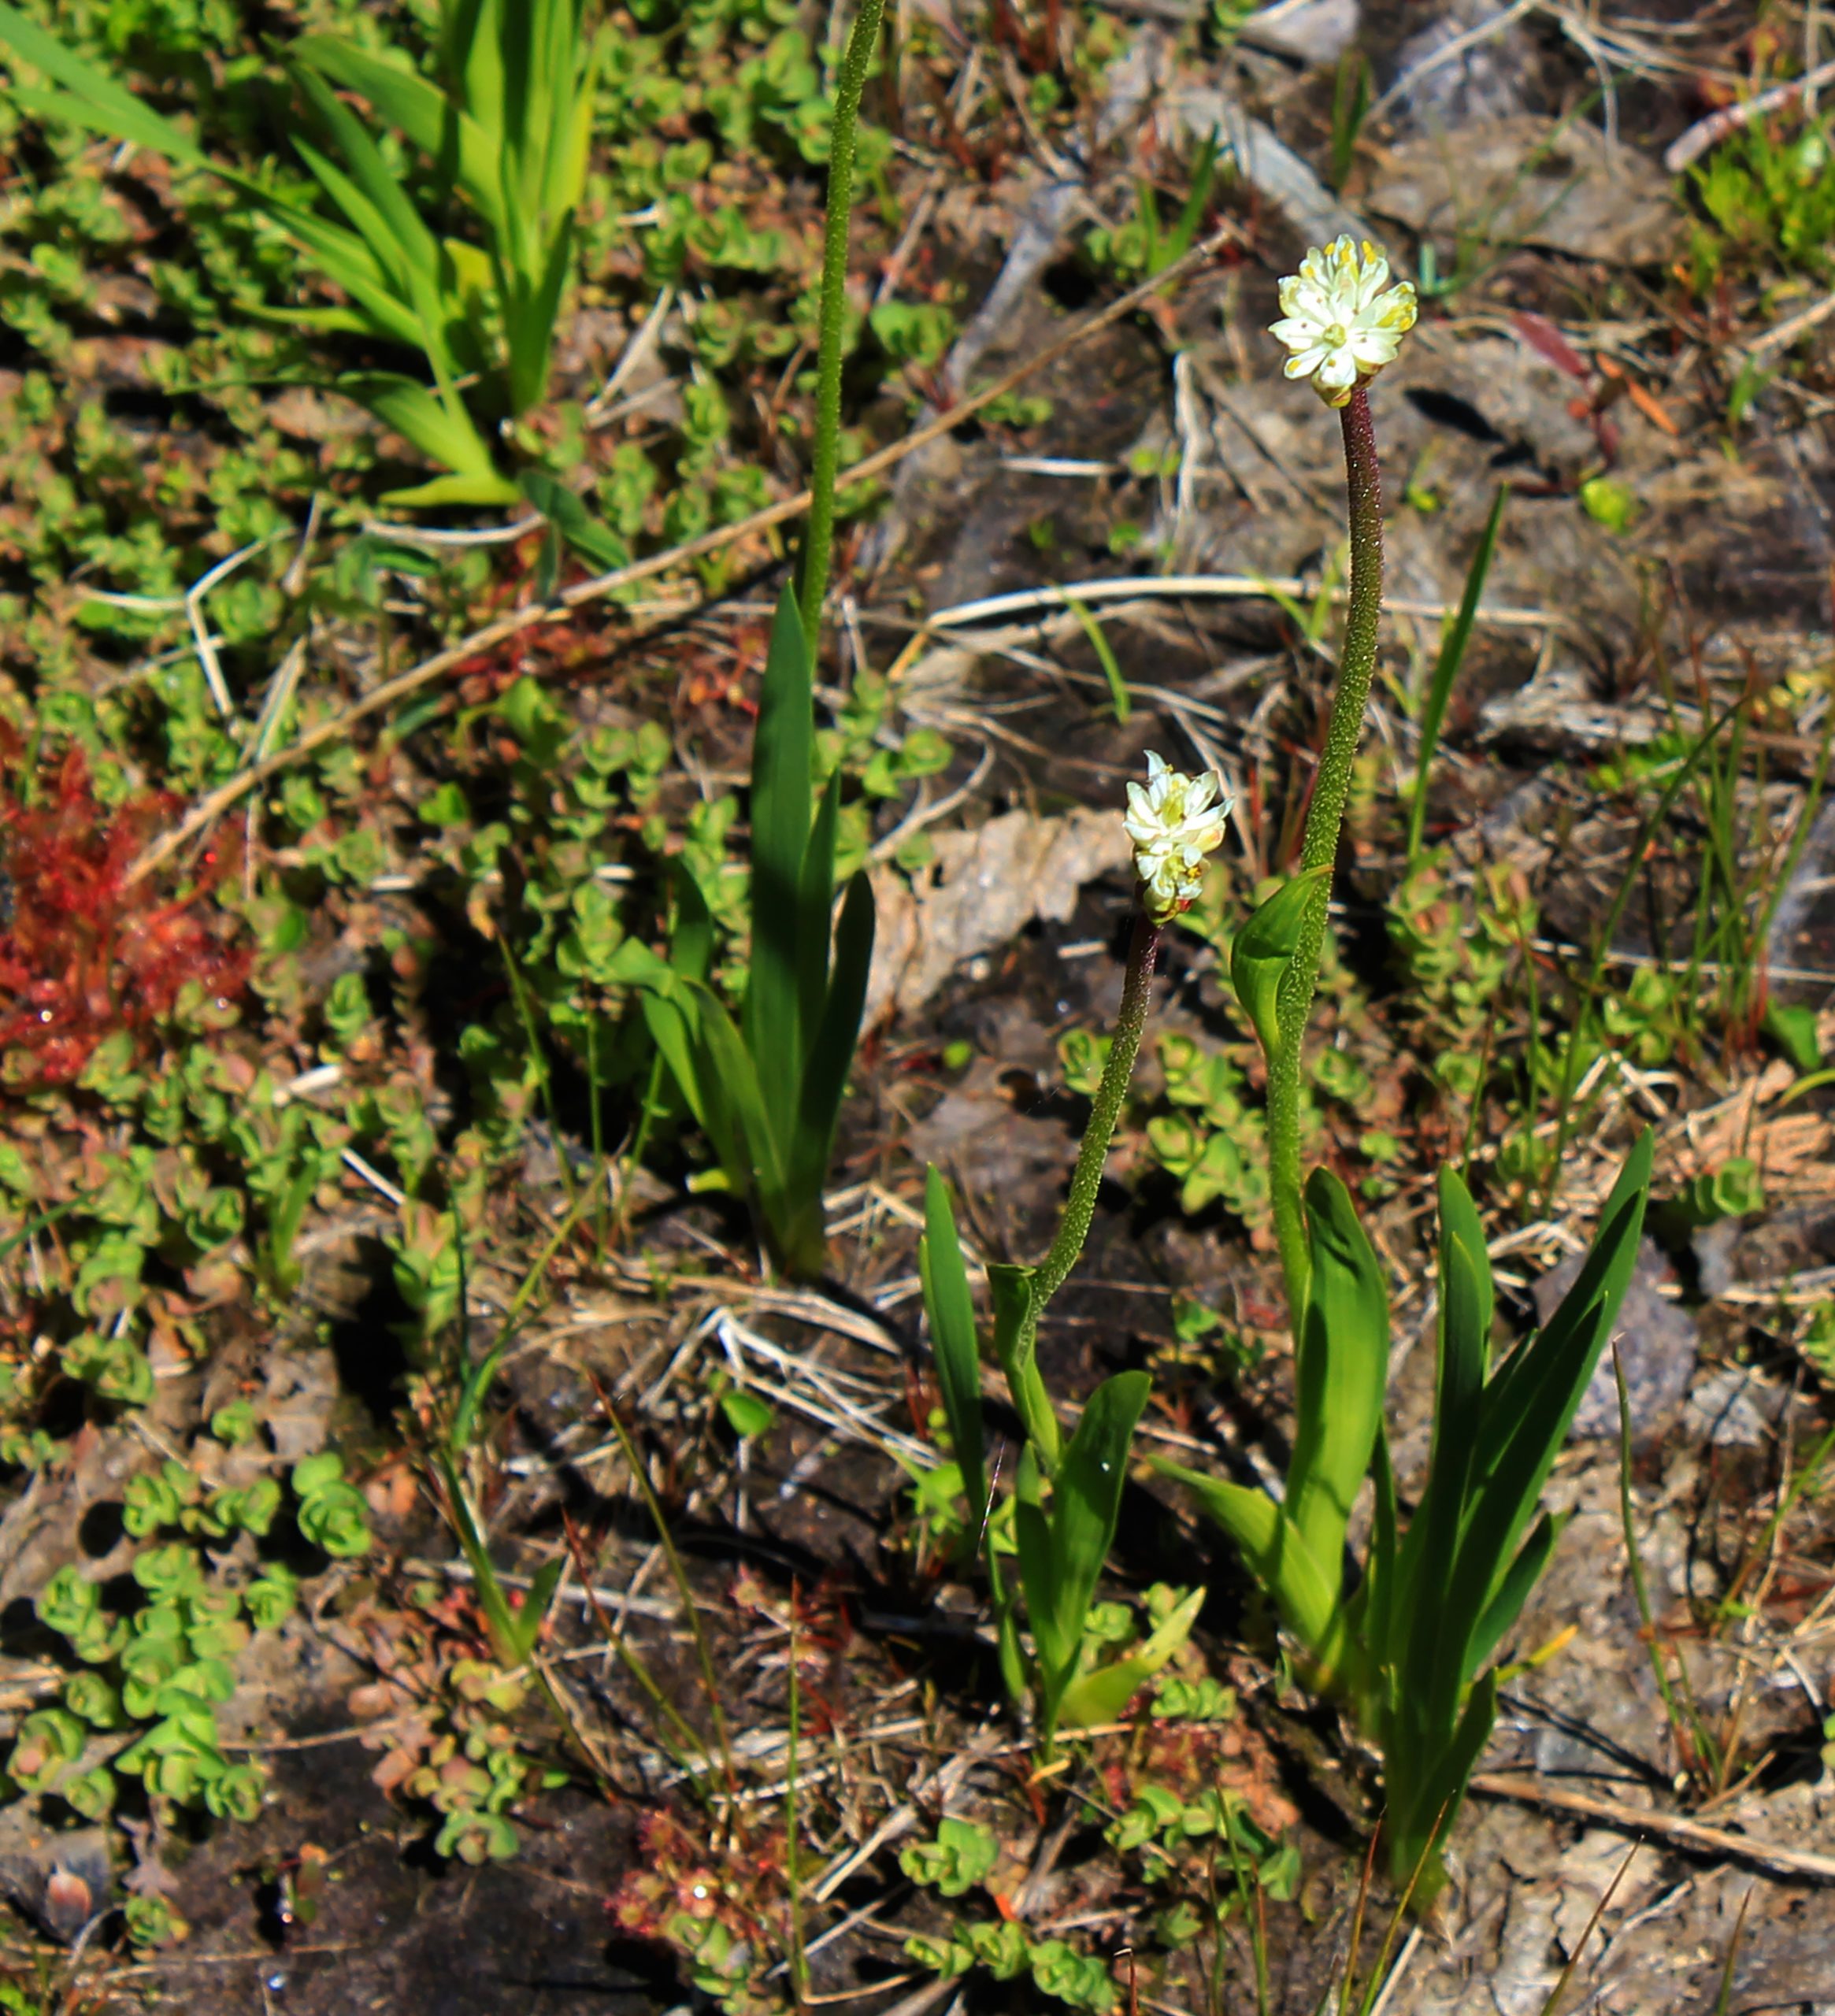 The carnivorous T. occidentalis (right) growing among other carnivorous plants (sundews) in Cypress Provincial Park, Canada. (Photo: Danilo Lima)